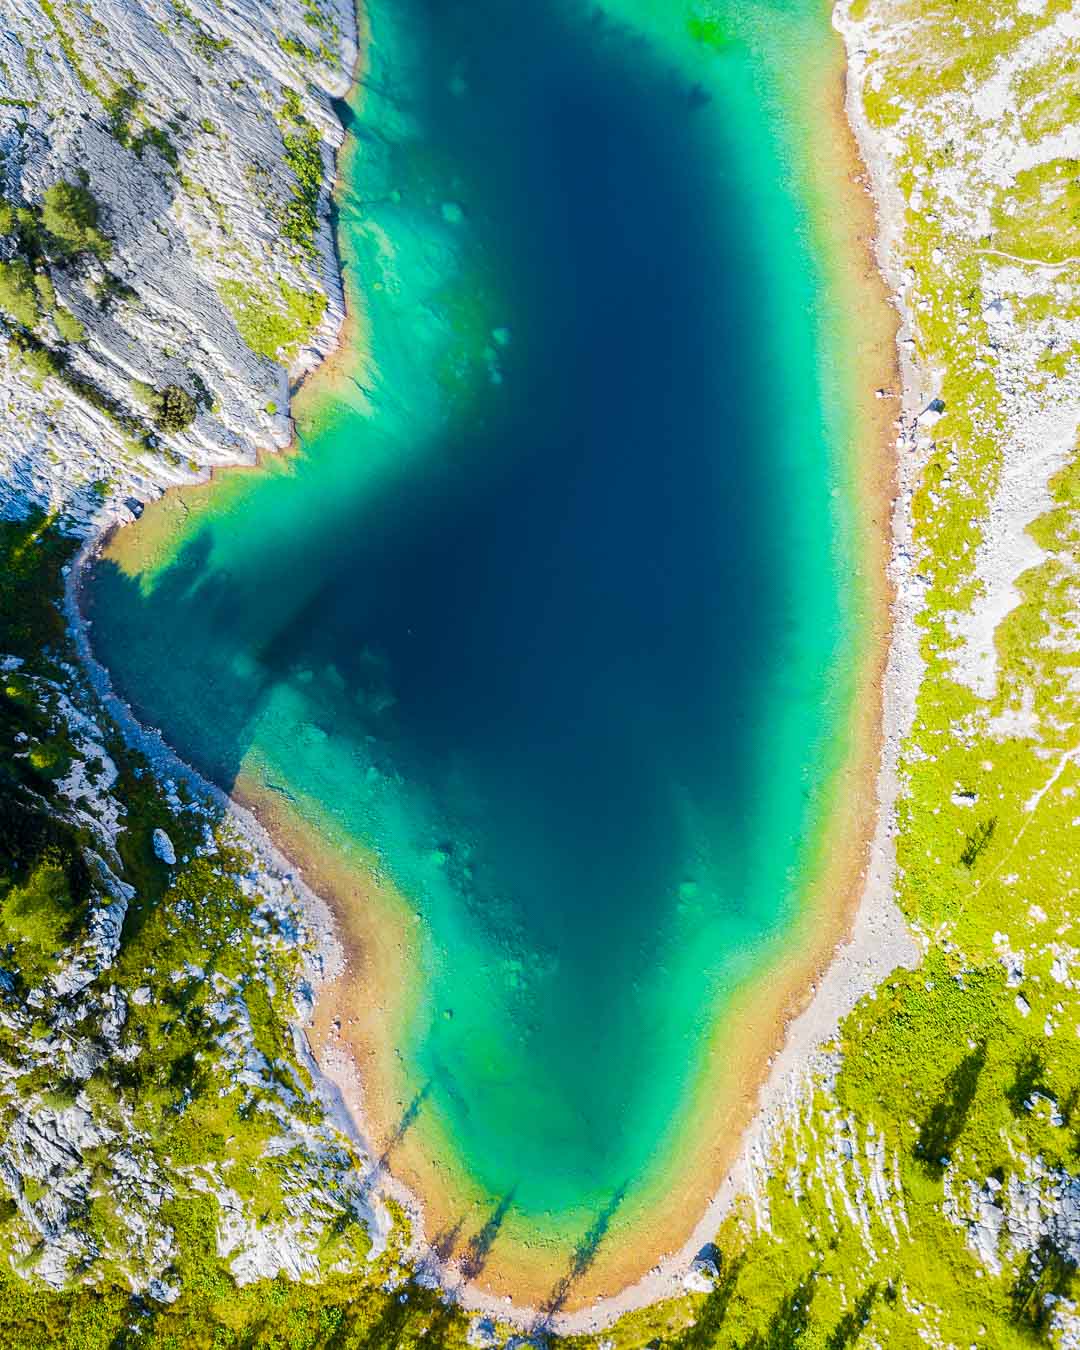 Lake Ledvica from a drone